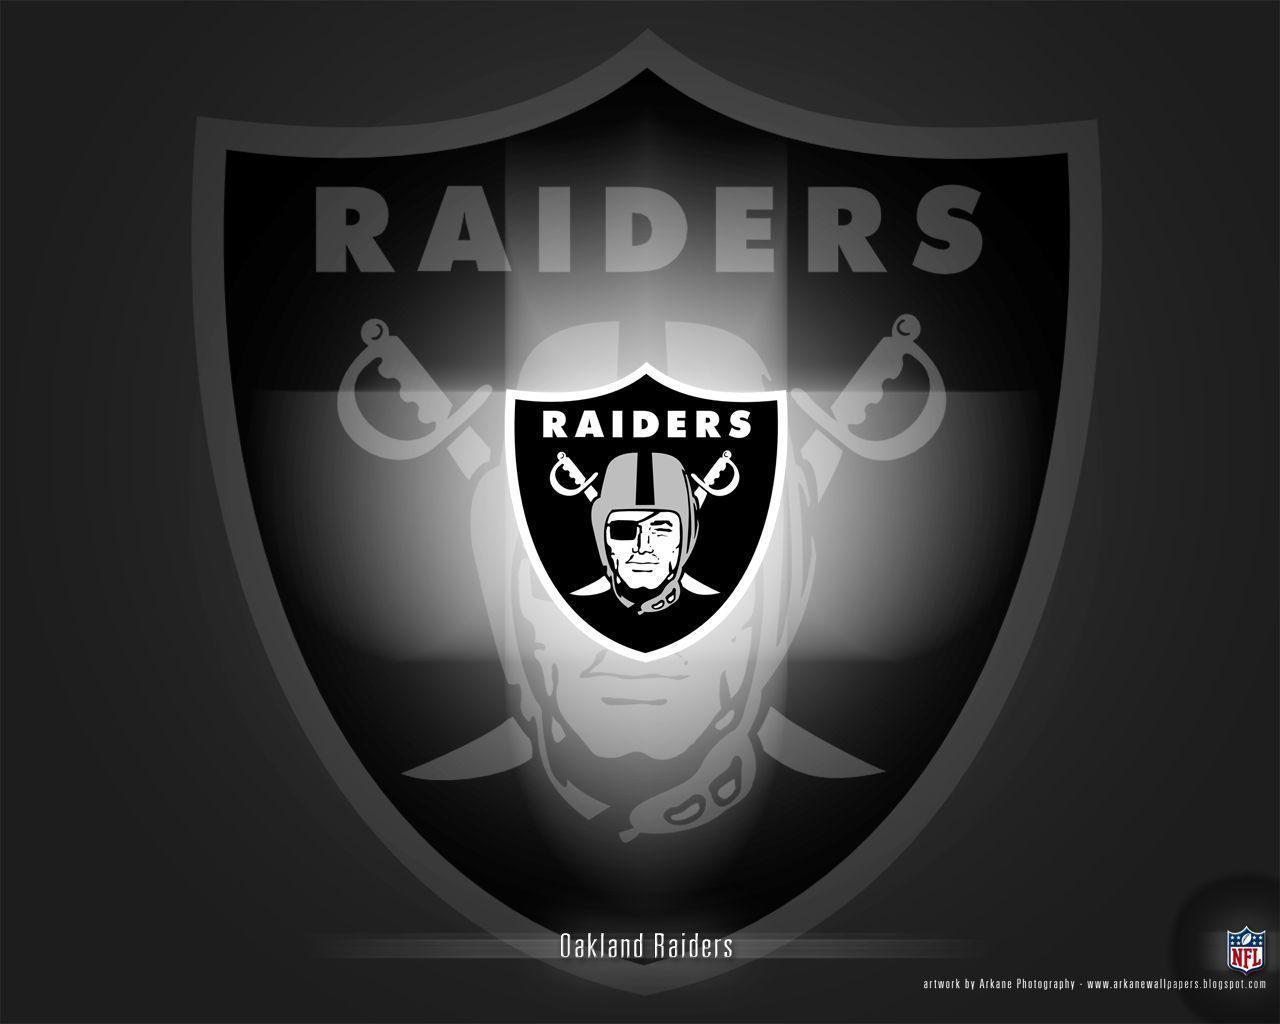 1280x1024px Oakland Raiders awesome photo 27